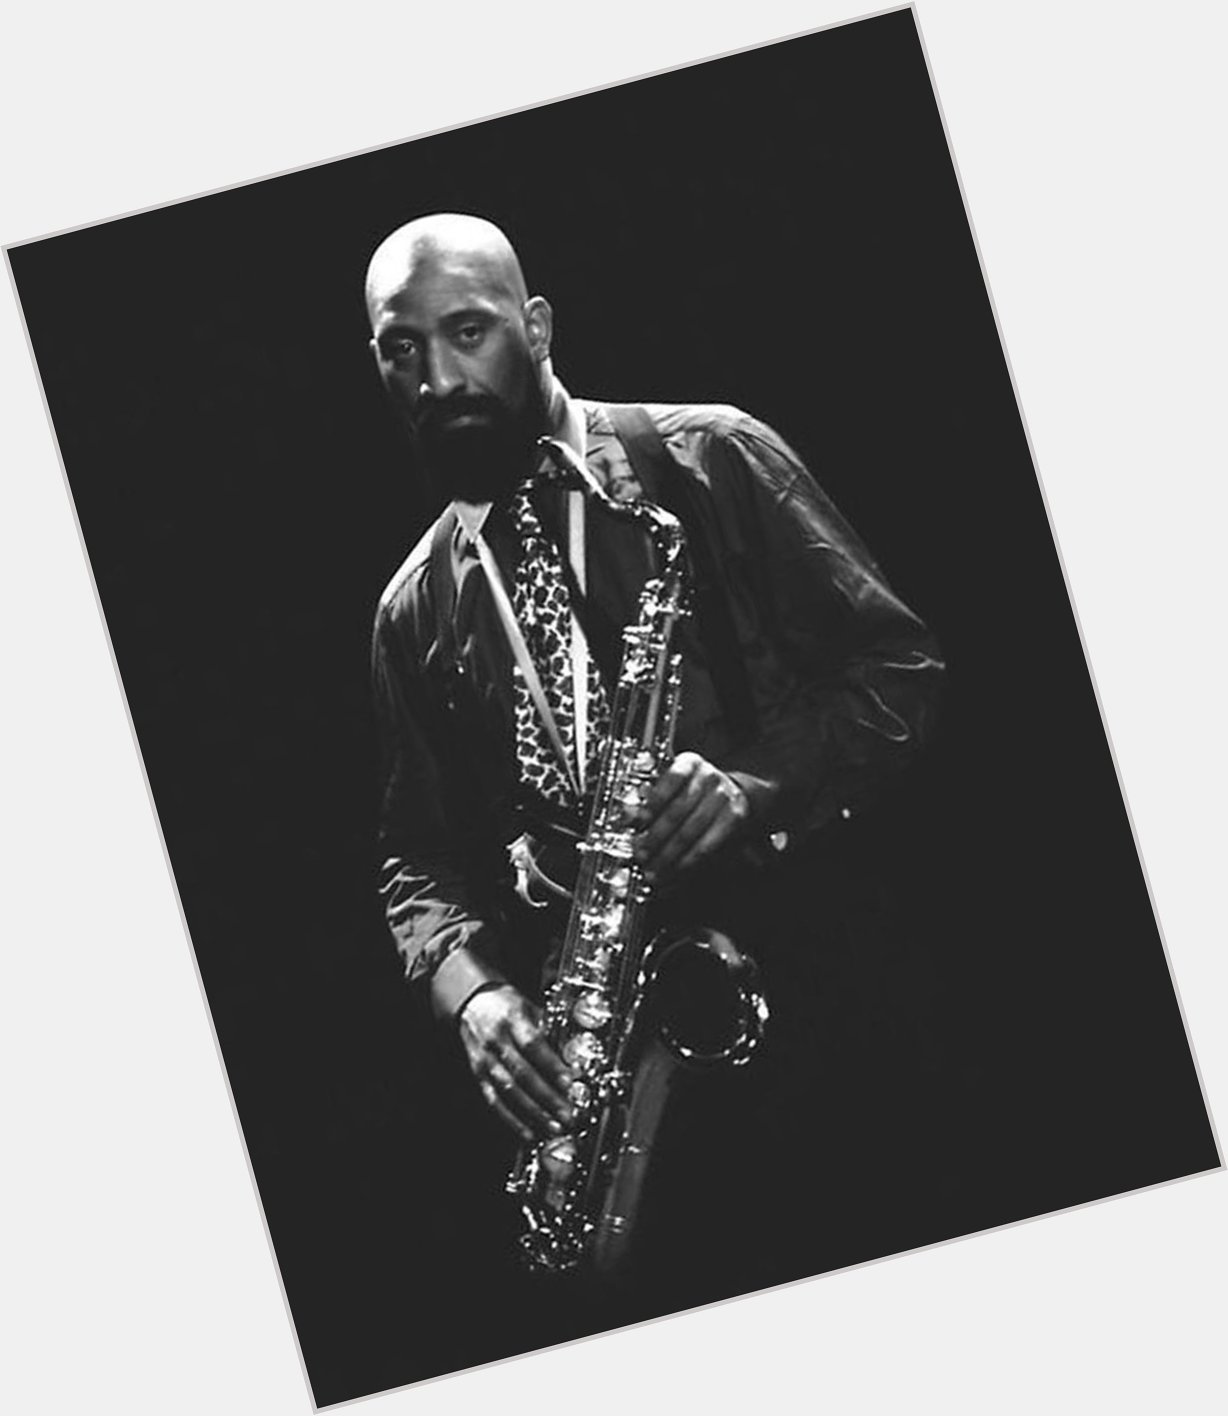 Happy 92nd birthday to the great Sonny Rollins. 